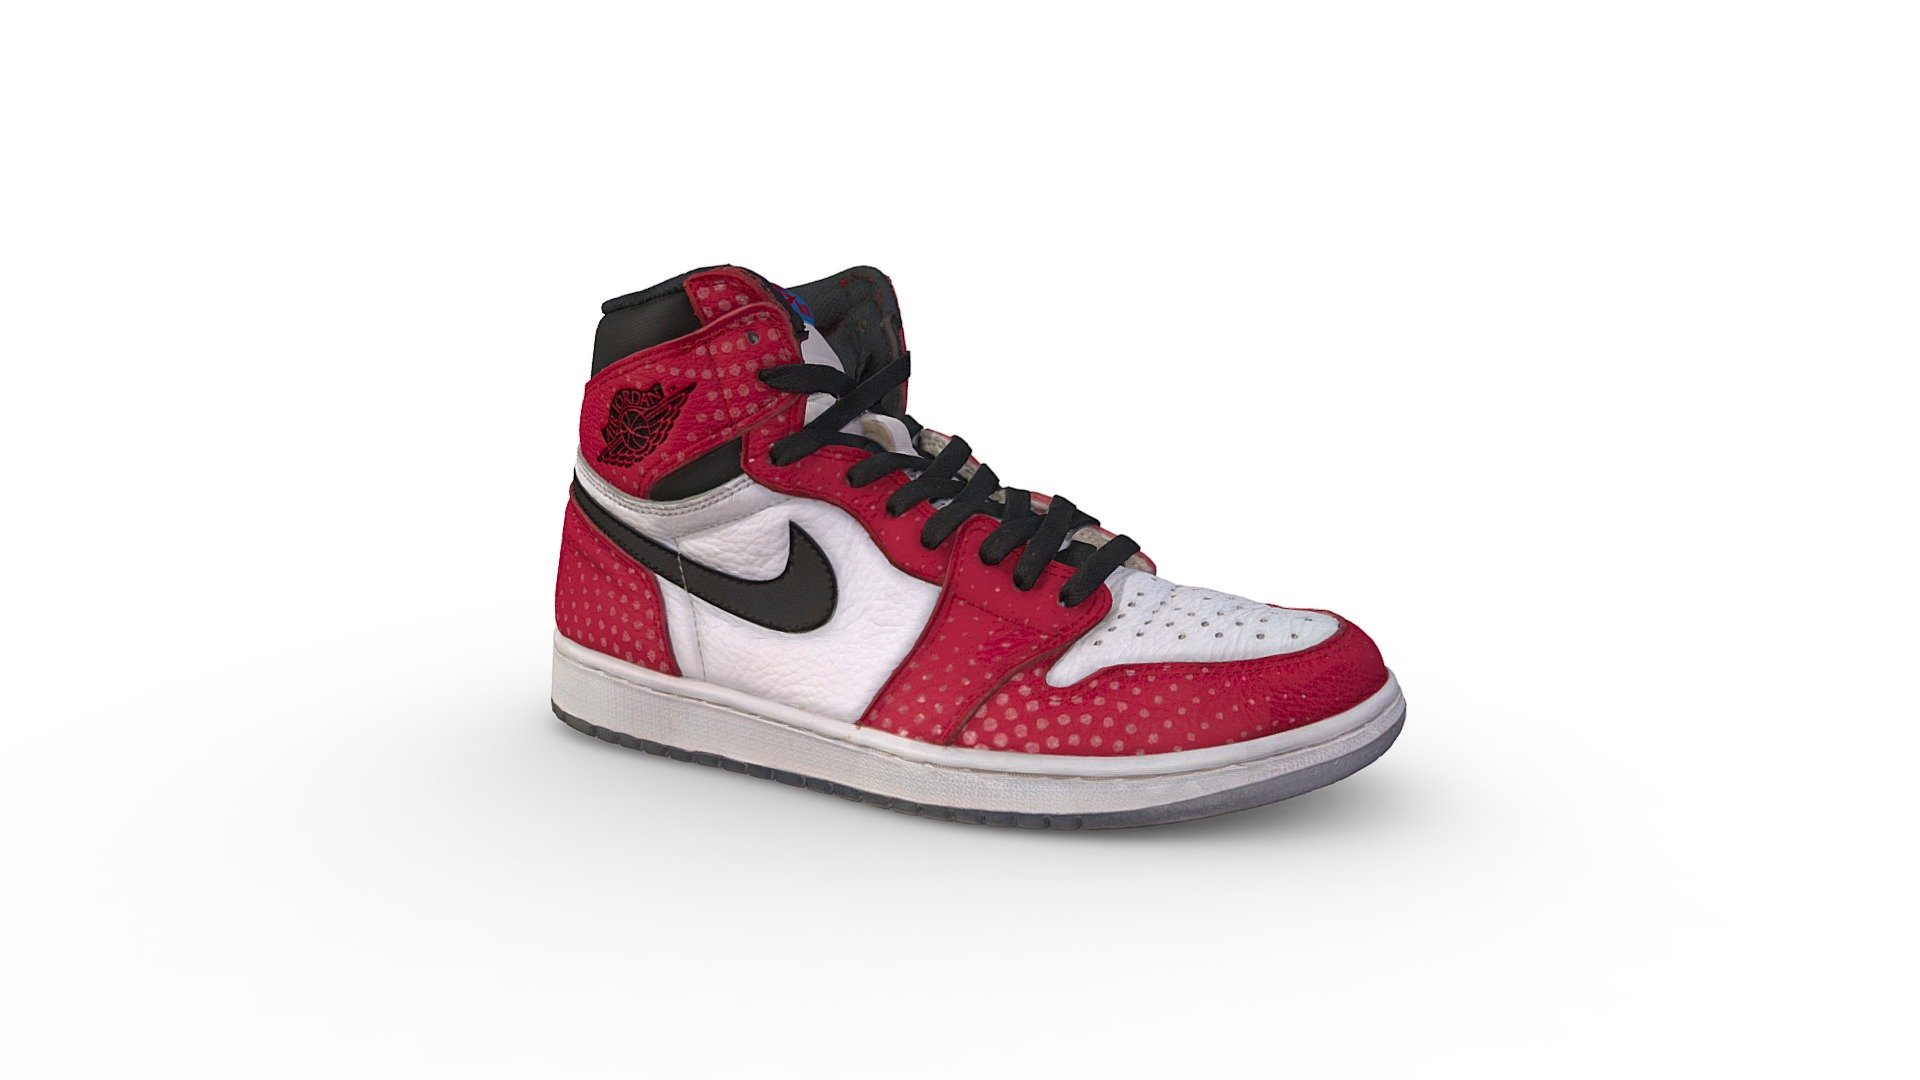 3D Scan of Jordan 1 Retro High Spider-Man Origin Story

If Spider-Man was a sneaker head, he probably would be rocking the Jordan 1 Retro High Spider-Man Origin Story. This AJ1 comes with a white upper plus red accents, black Nike “Swoosh”, white midsole, and translucent sole. These sneakers released in December 2018 and retailed for $160 3d model